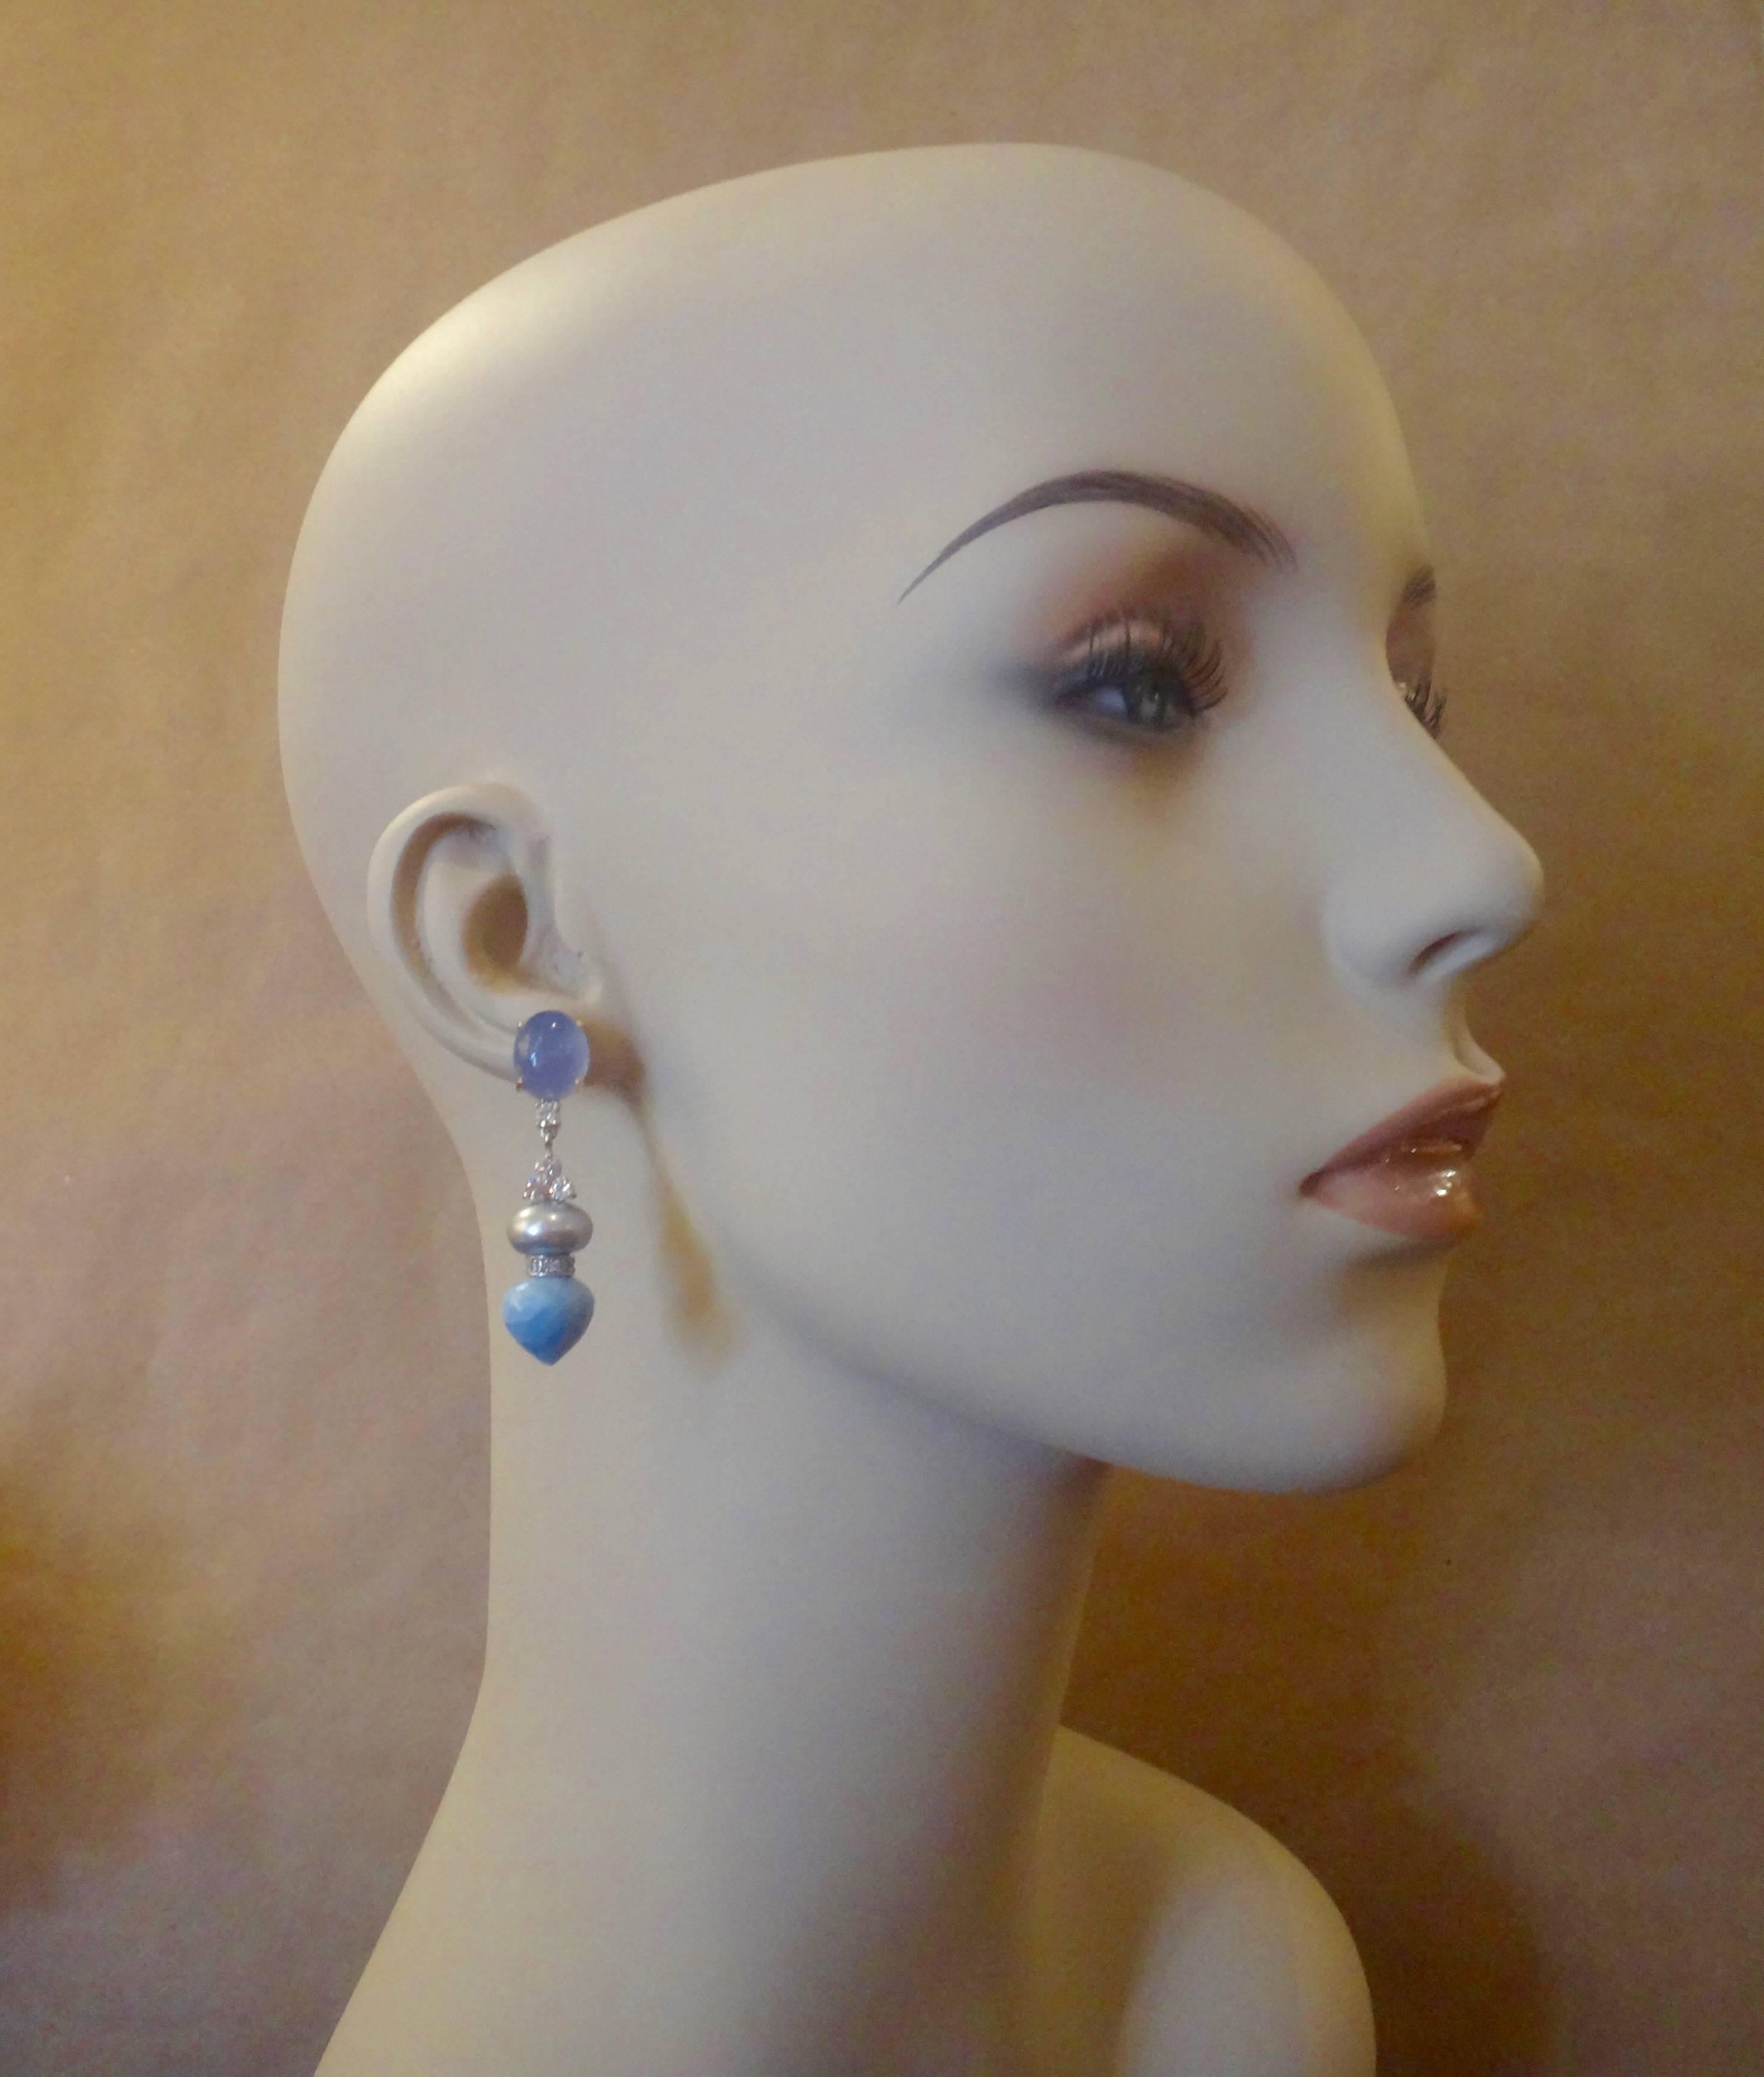 Cabochon blue chalcedony, white diamonds, gray pearls and Peruvian blue opals combine to create these dangle earrings.  The chalcedony is a cooling blue color which compliment the frosty blue/gray of the opals.  The opals themselves are shaped in a